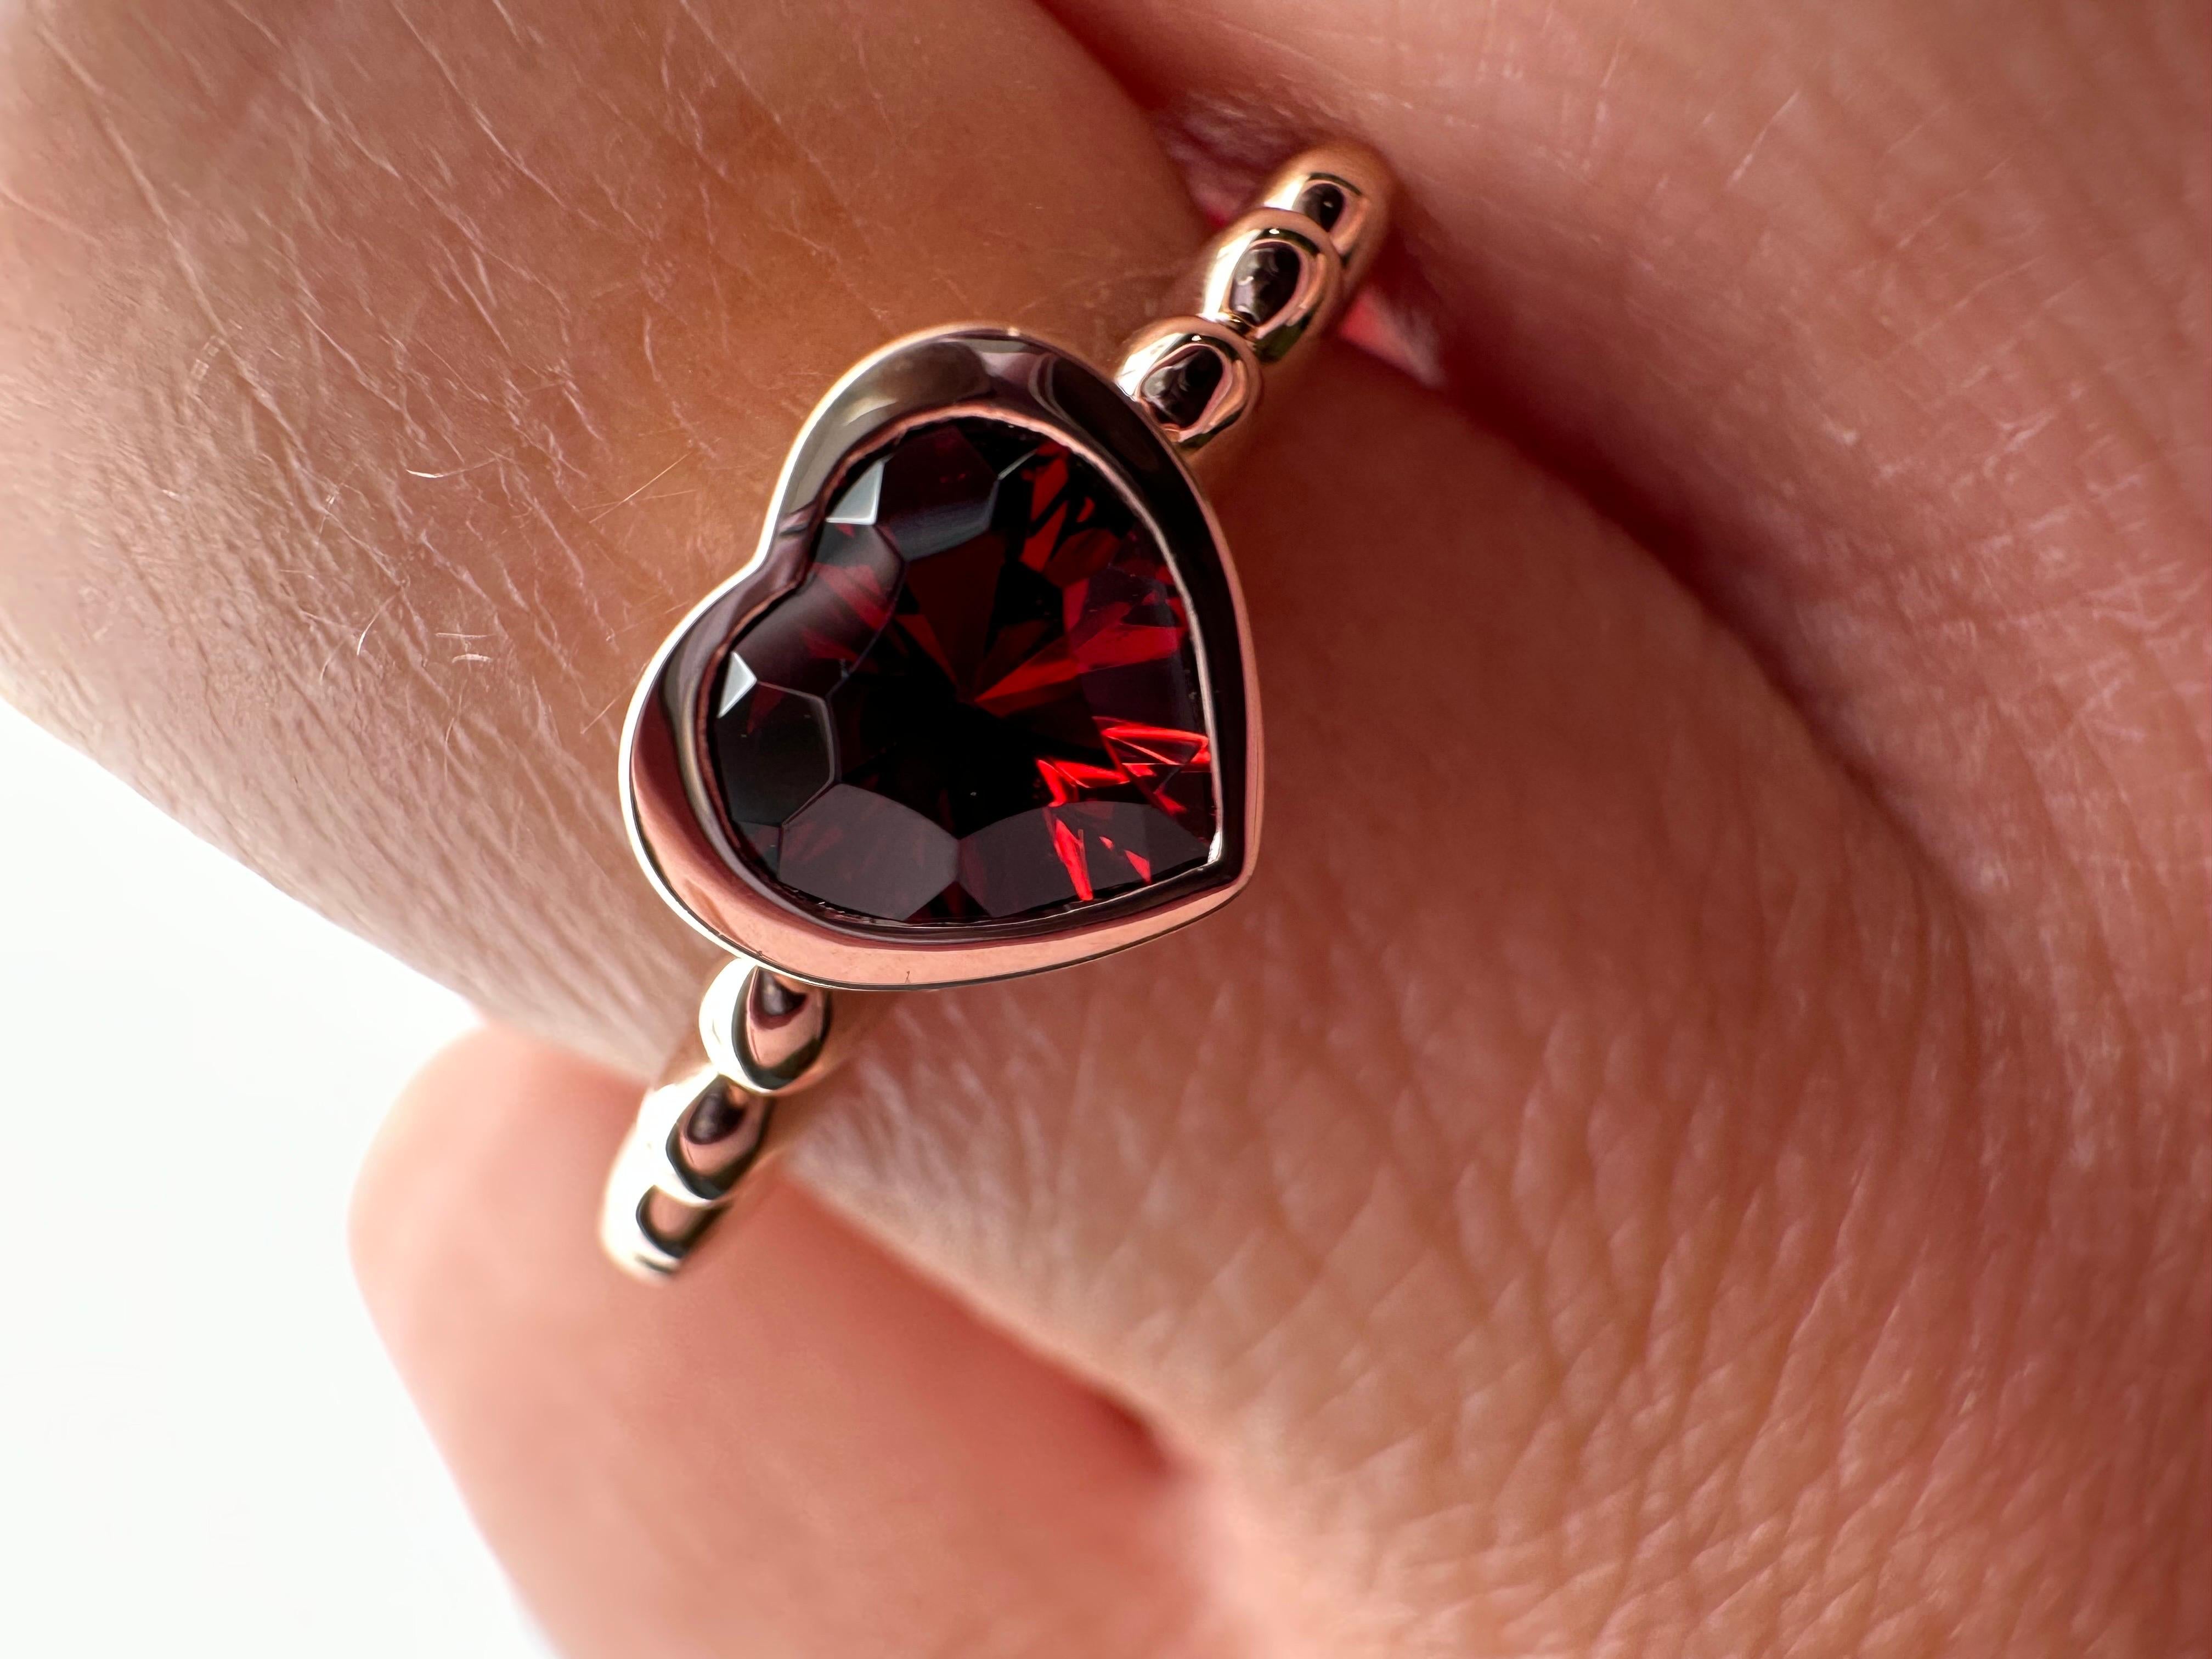 One of the most romantic rings you would come across, looks so gentle and loving but at same time very sterdy and well made. The ring is a size 7.5 but can be resized. The garnet is natural fancy cut into a heart shape and originating from Czech